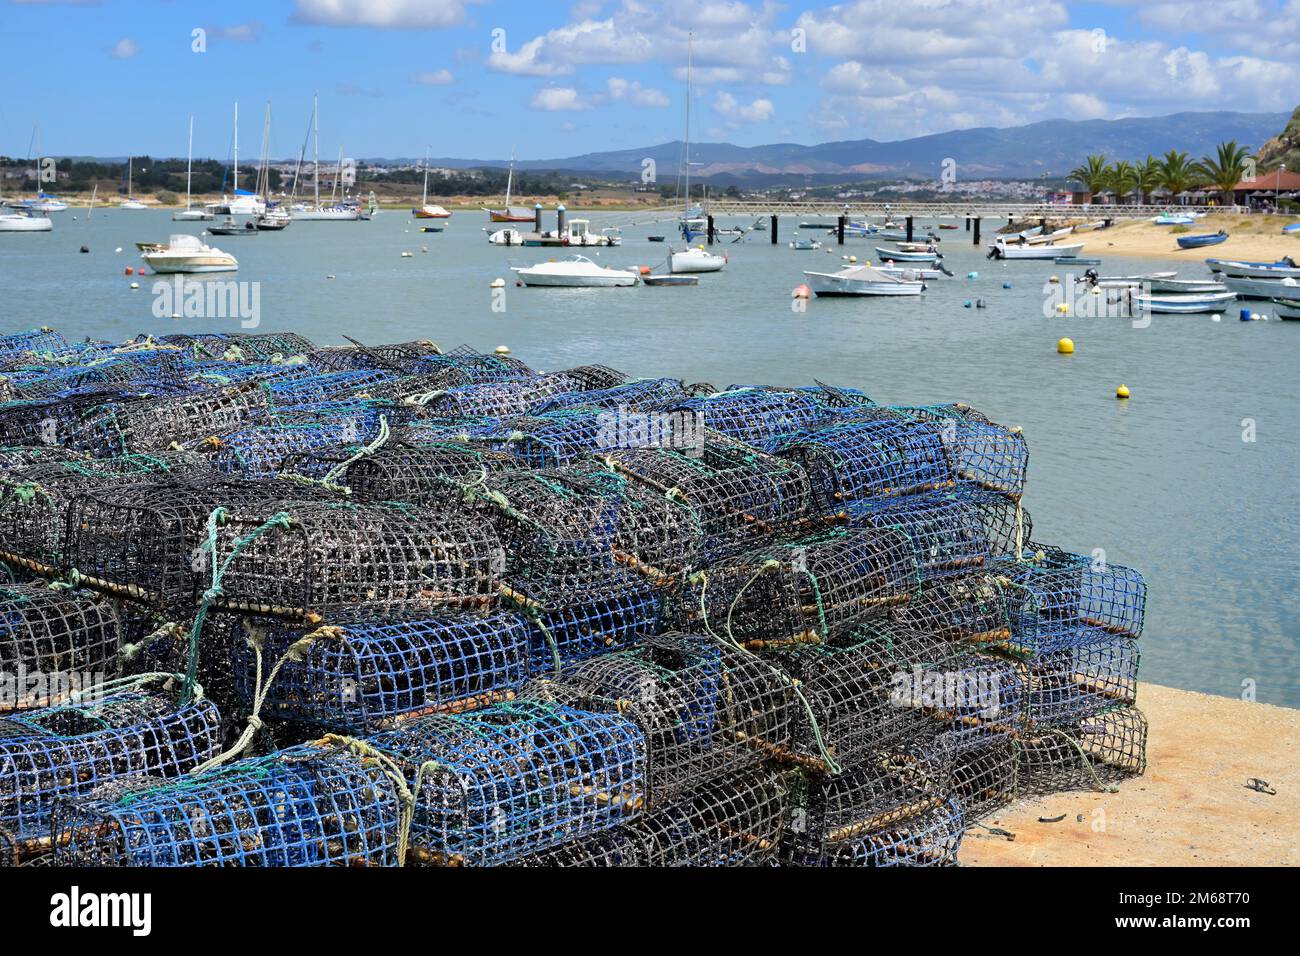 Basket fish traps for crab and lobster fishing in the Atlantic Ocean, Alvor fishing harbour,  Portimao municipality, Algarve, Portugal Stock Photo